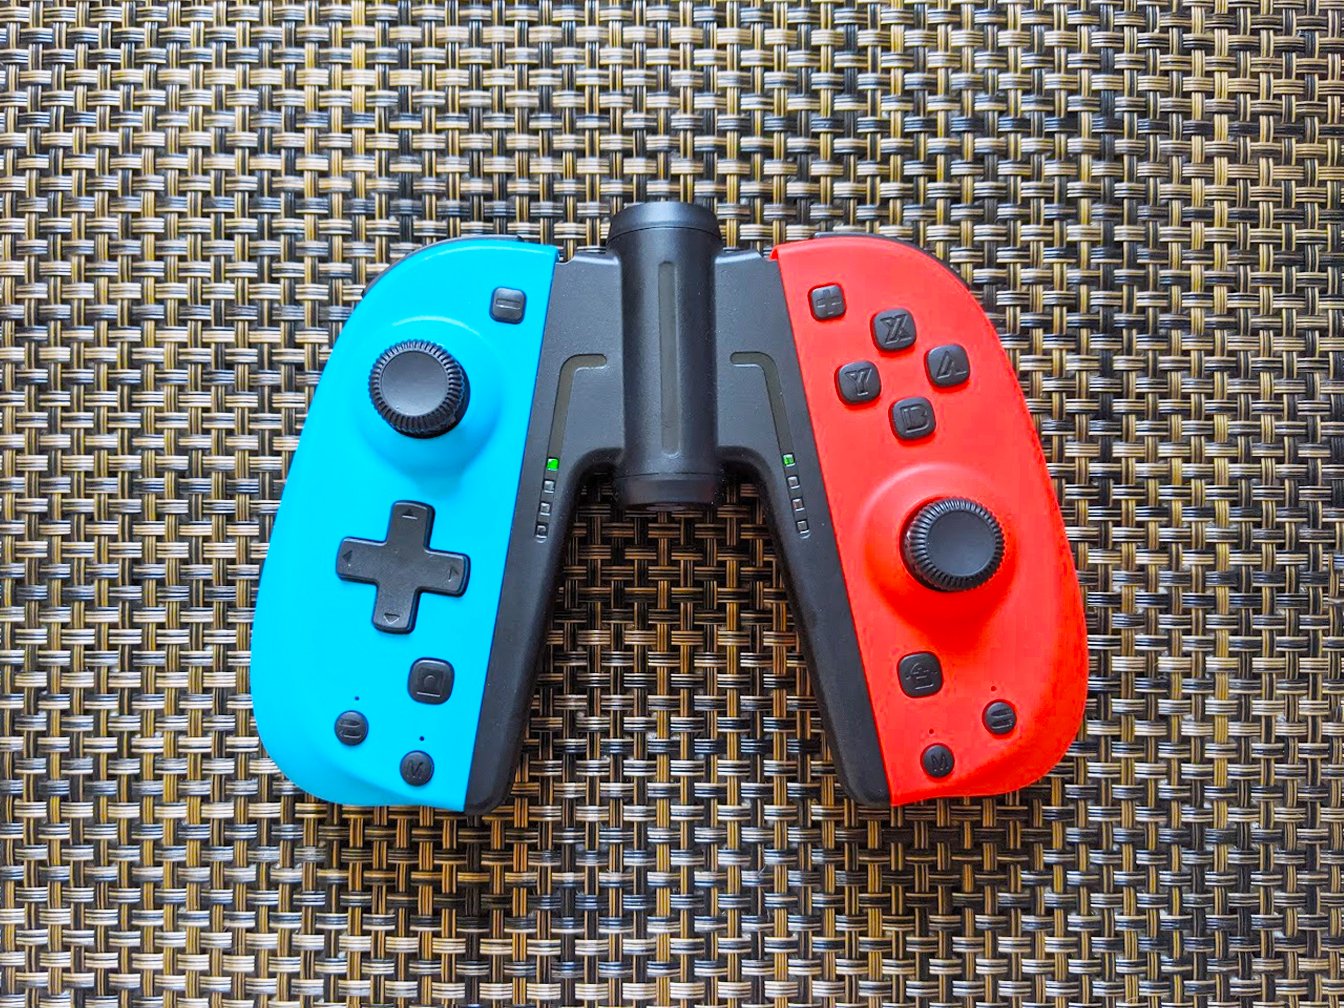 GEEMEE Tutuo Joy-Pad Wireless Controller for Nintendo Switch review: Better  than Joy-Cons